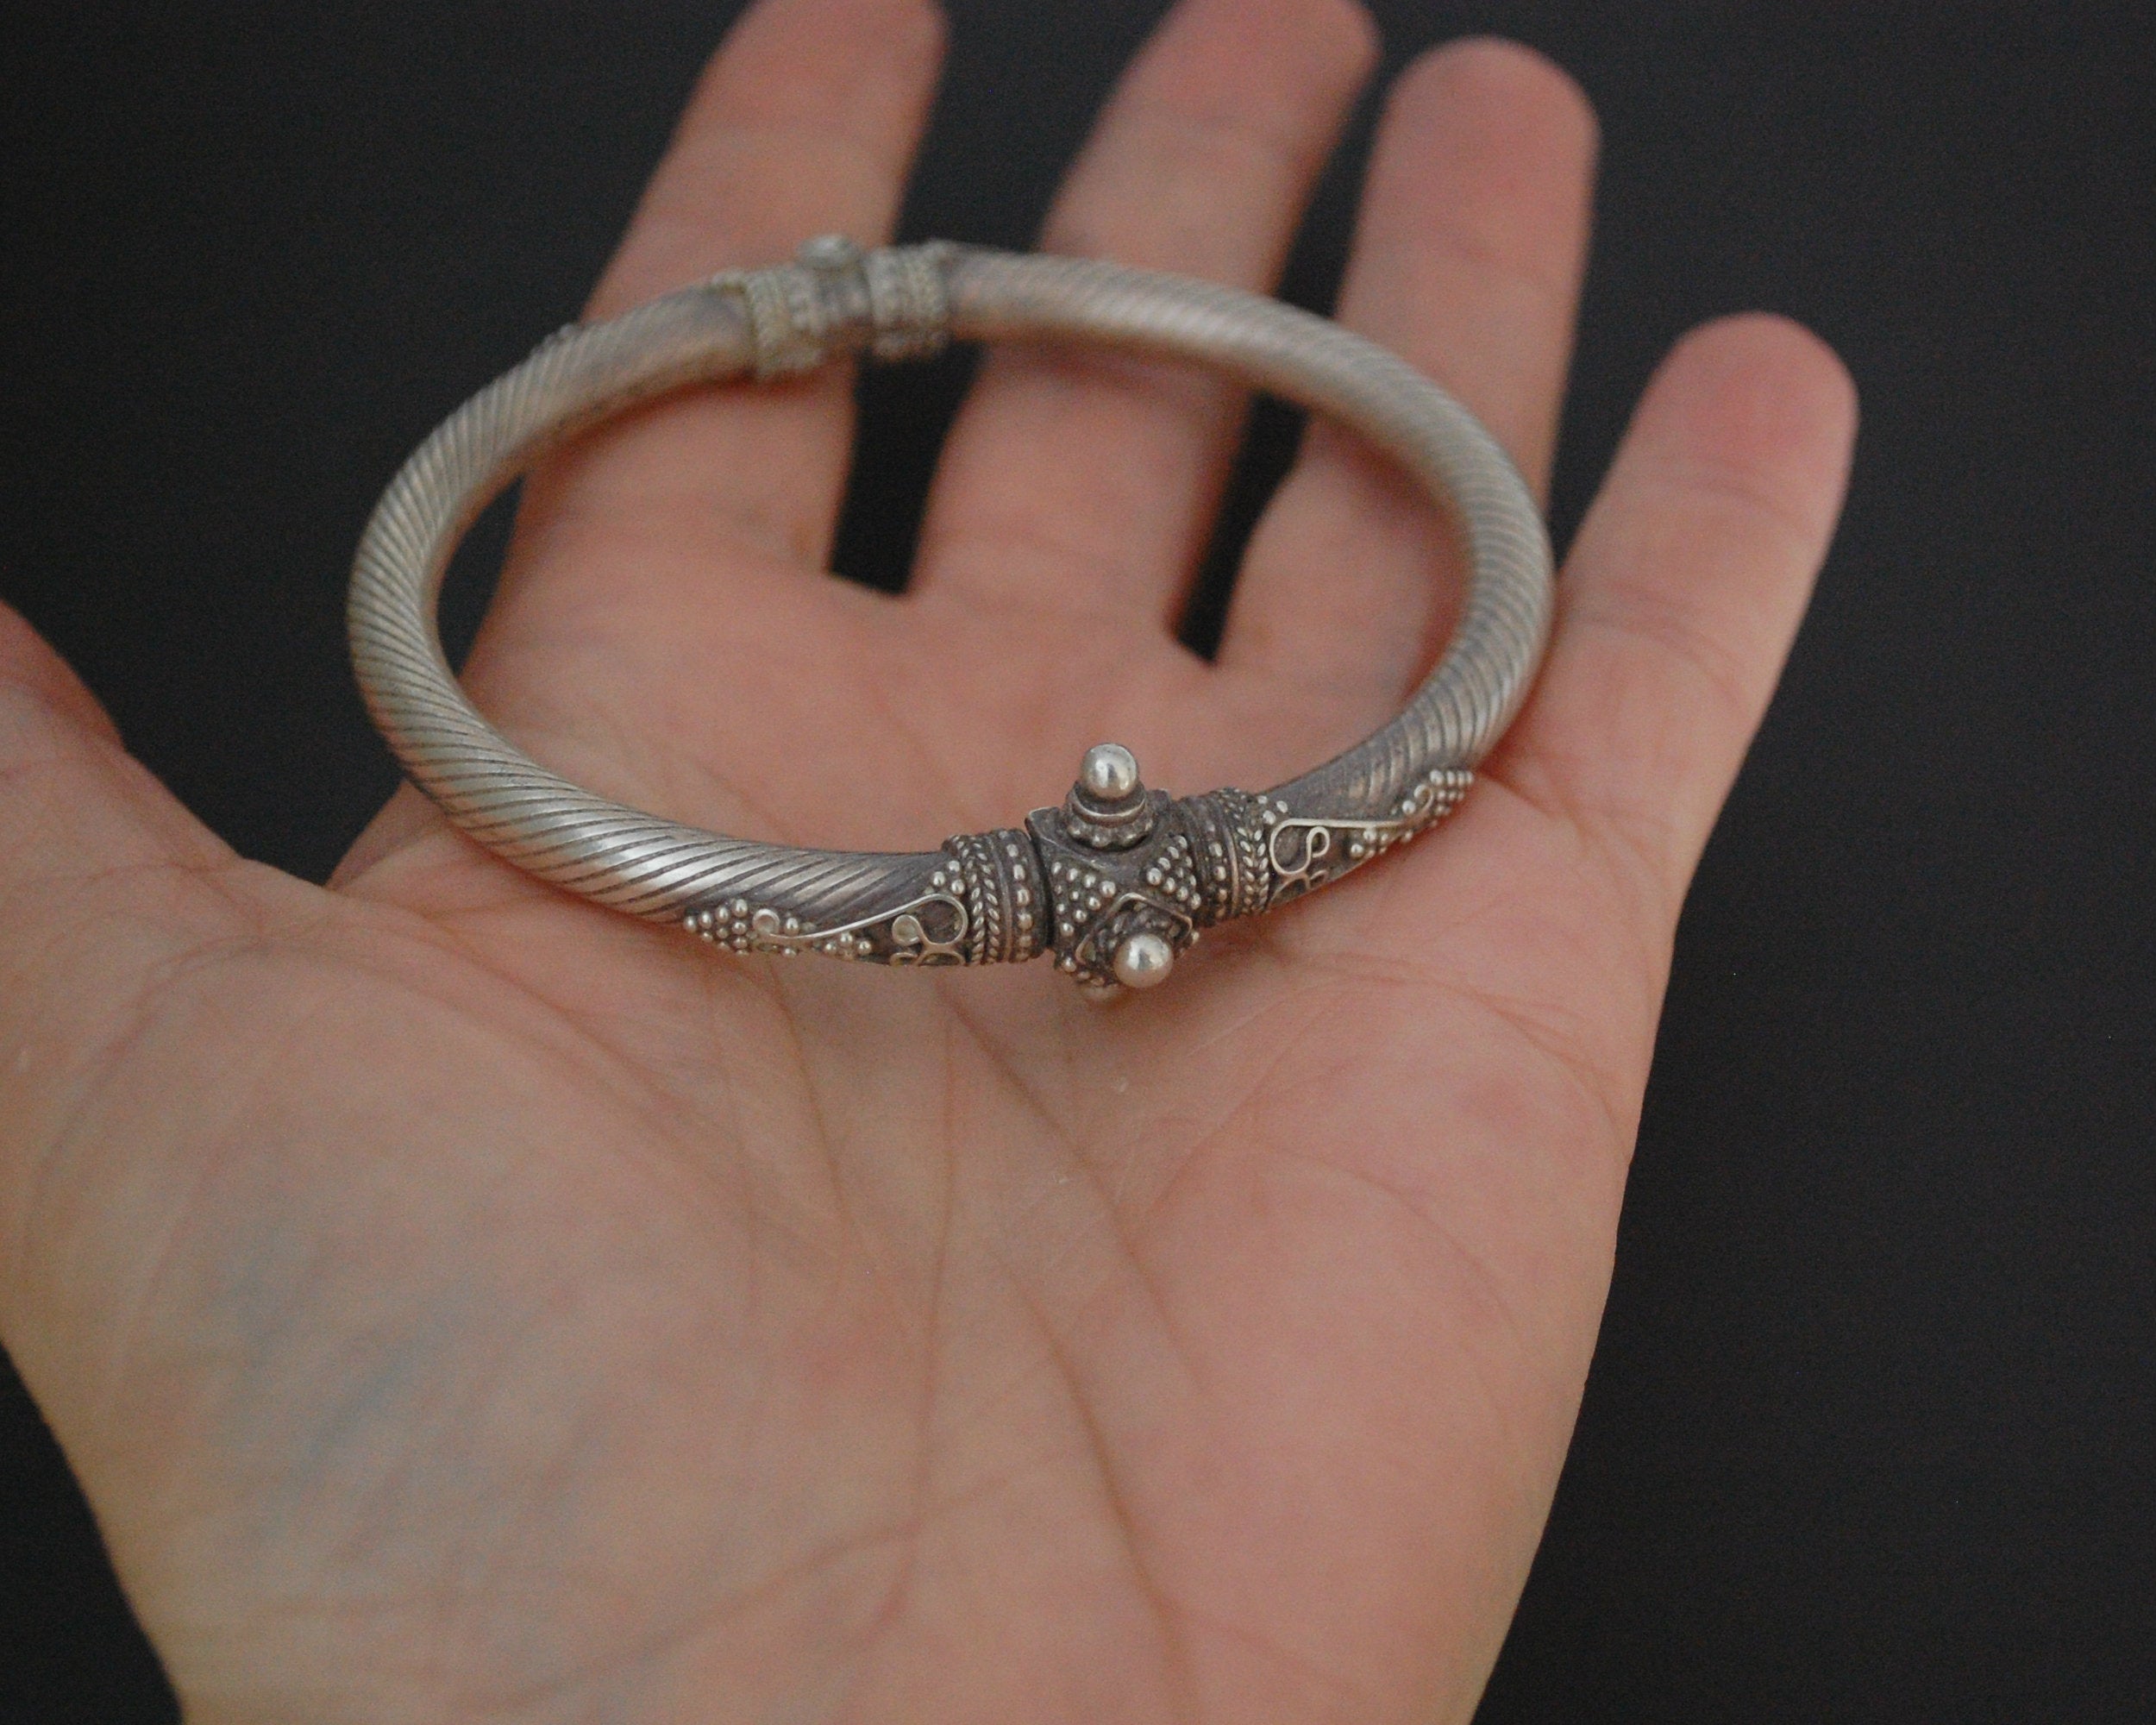 Ethnic Indian Silver Bracelet from India - Hinged